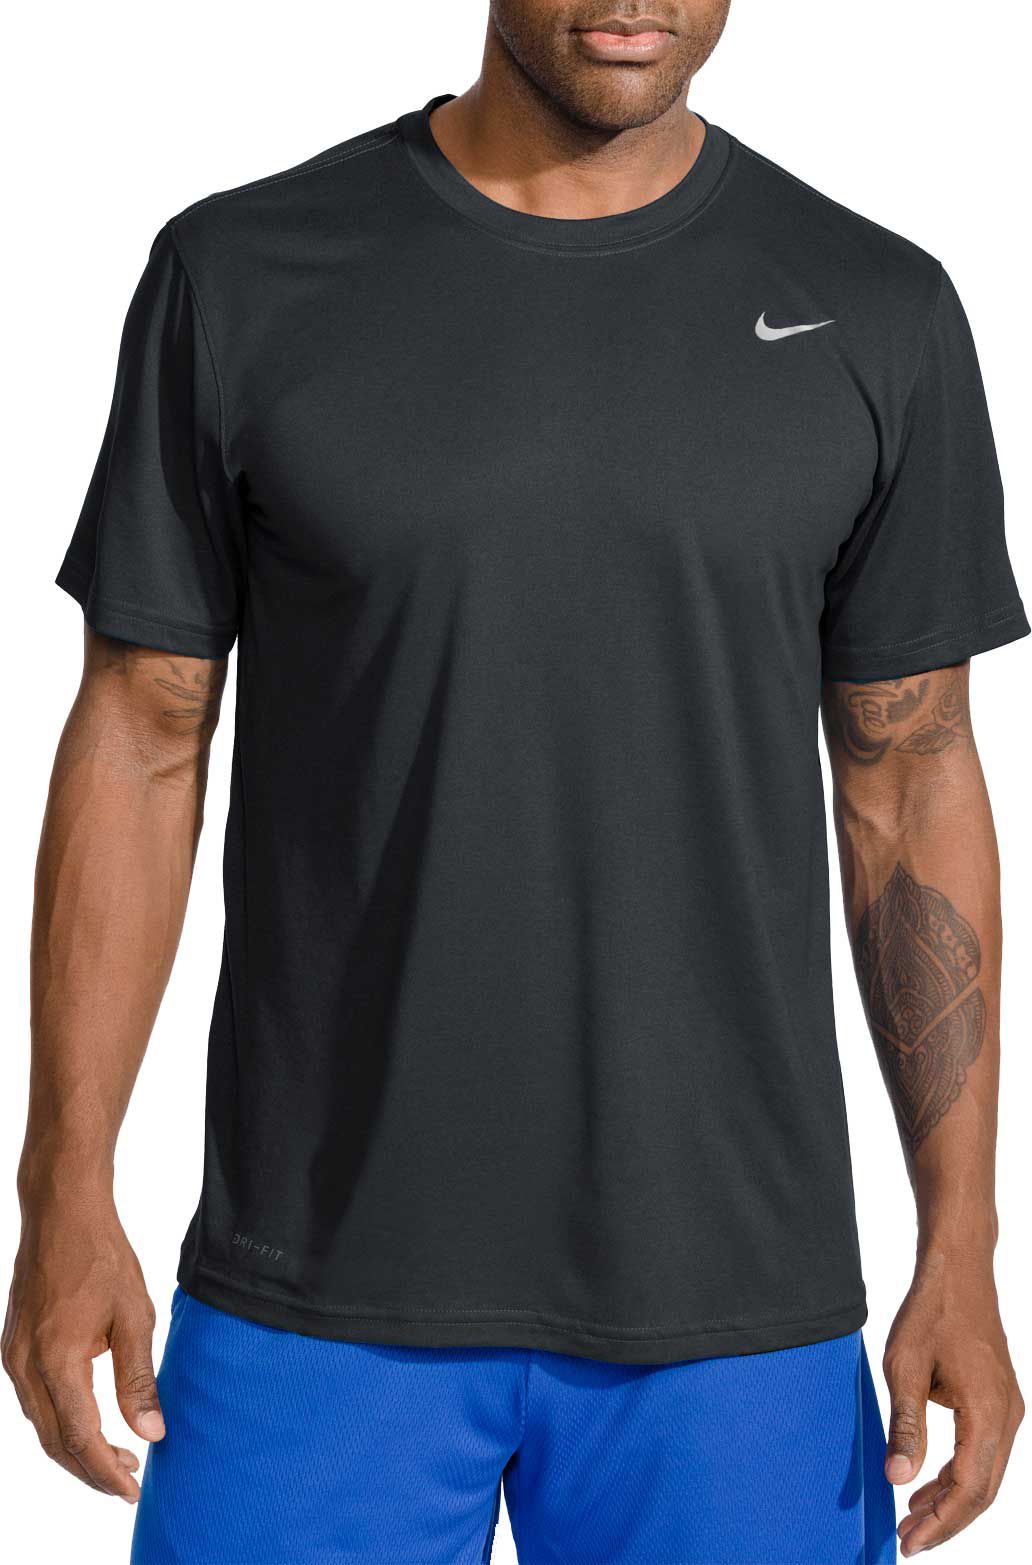 Nike Clothes Apparel Curbside Pickup Available At Dick S - 35 off nike girls sports tee roblox roblox shirt nike